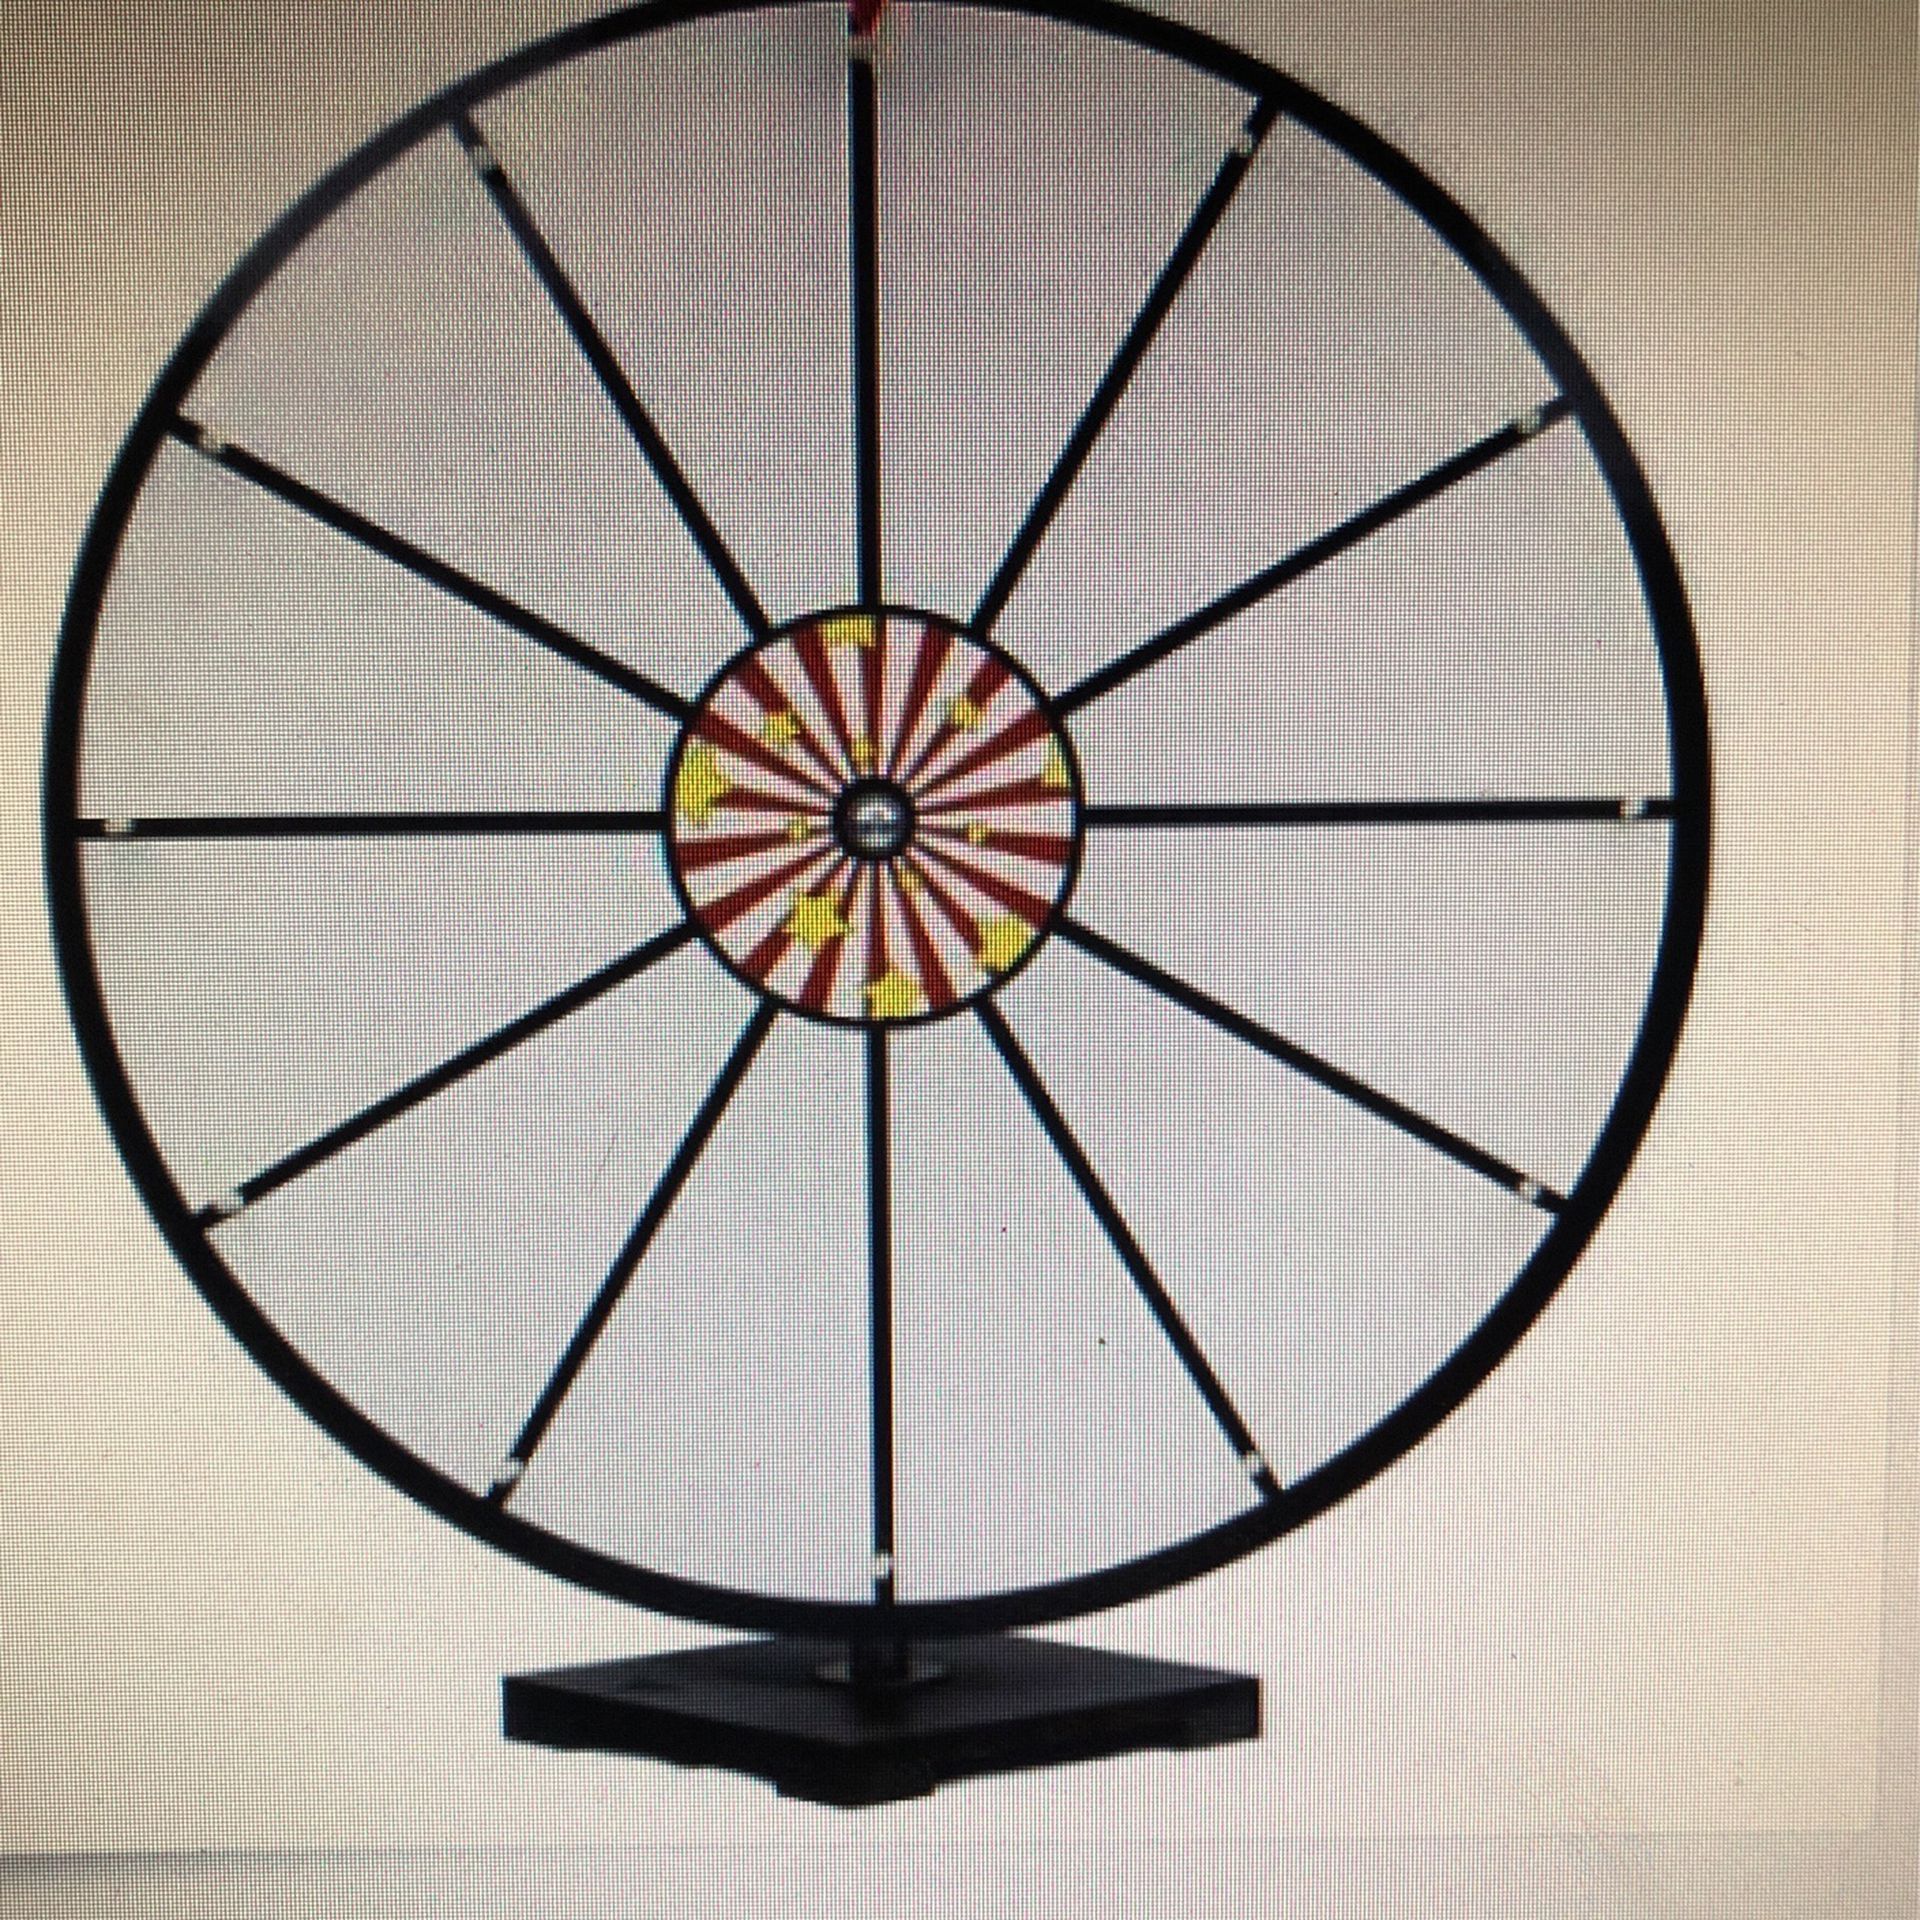 24” Prize Wheel Dry Erase By MIDWAY MONSTERS